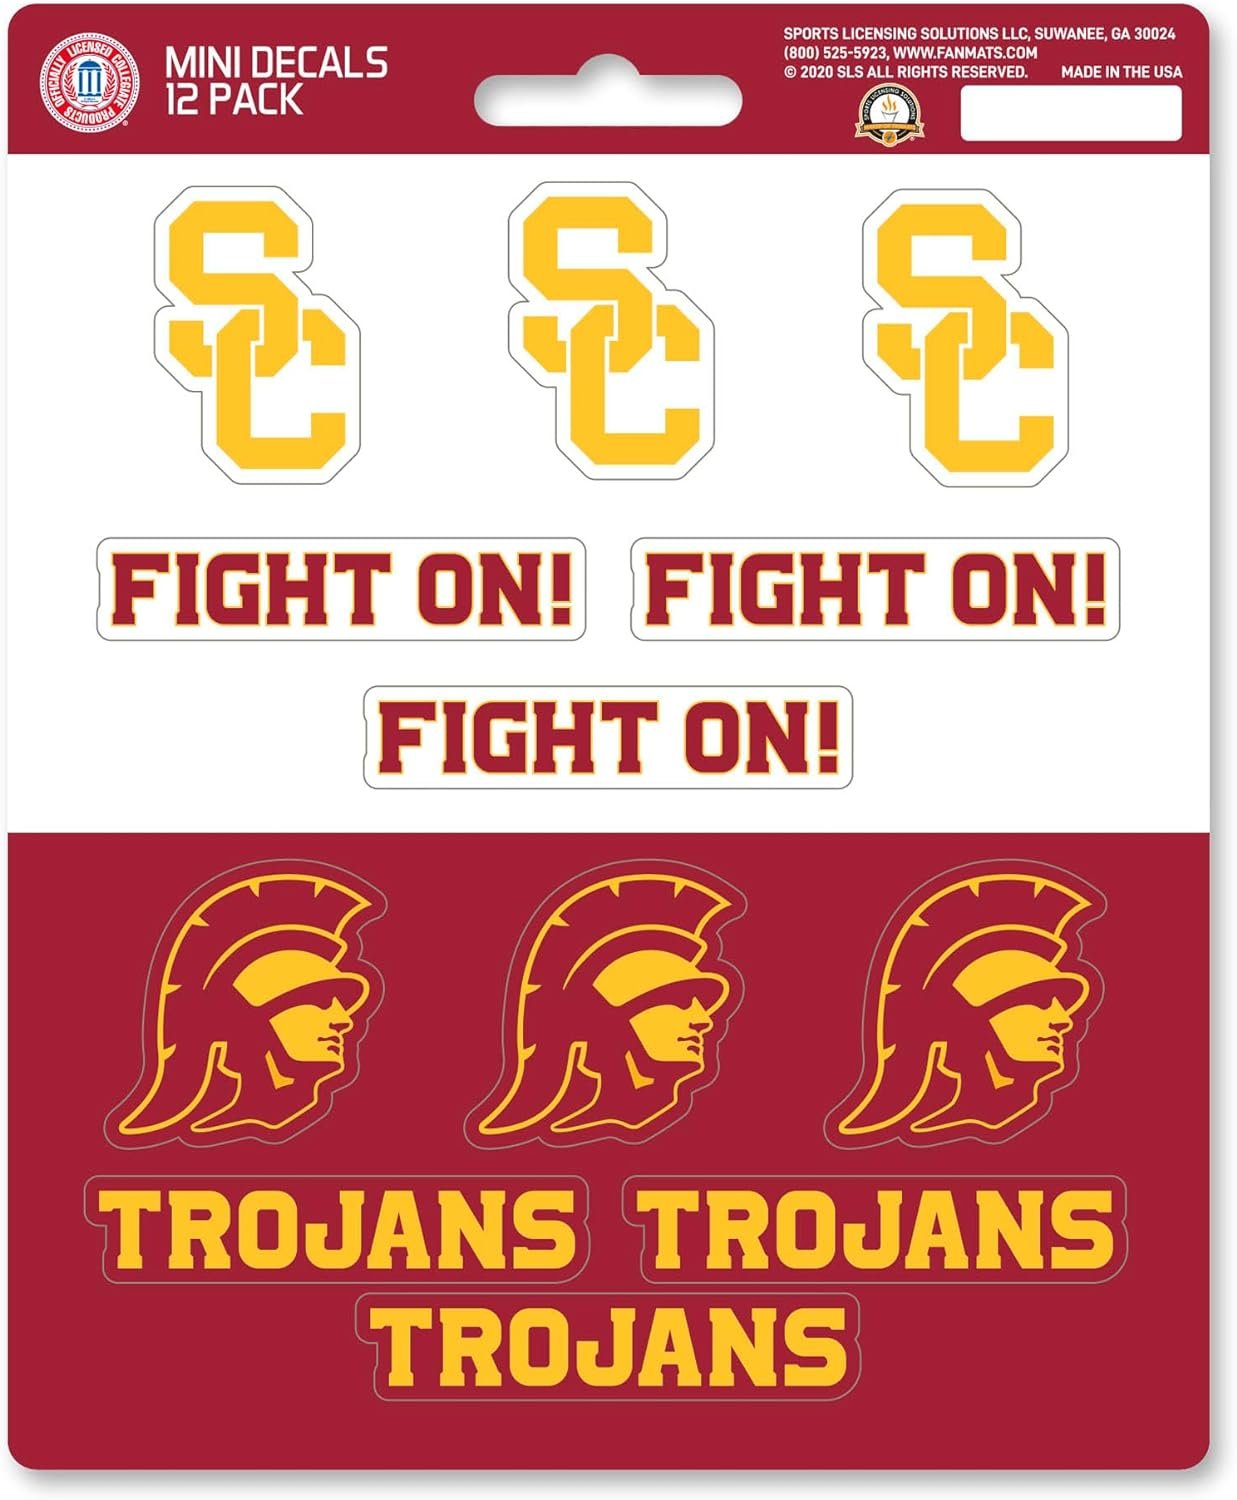 University of Southern California USC Trojans 12-Piece Mini Decal Sticker Set, 5x6 Inch Sheet, Gift for football fans for any hard surfaces around home, automotive, personal items